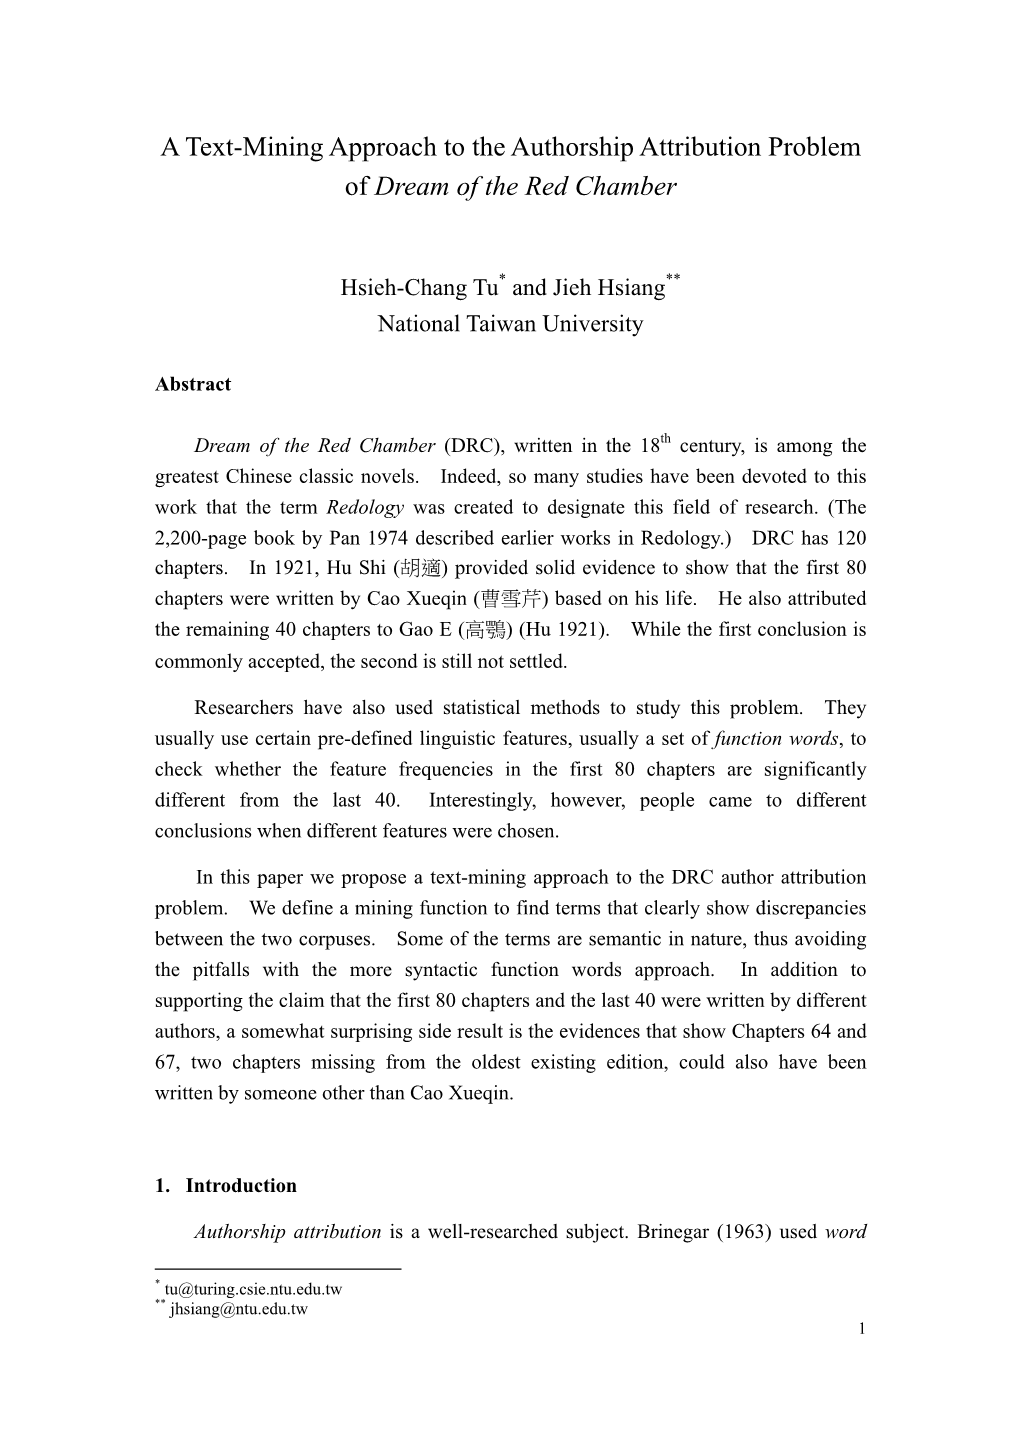 A Text-Mining Approach to the Authorship Attribution Problem of Dream of the Red Chamber